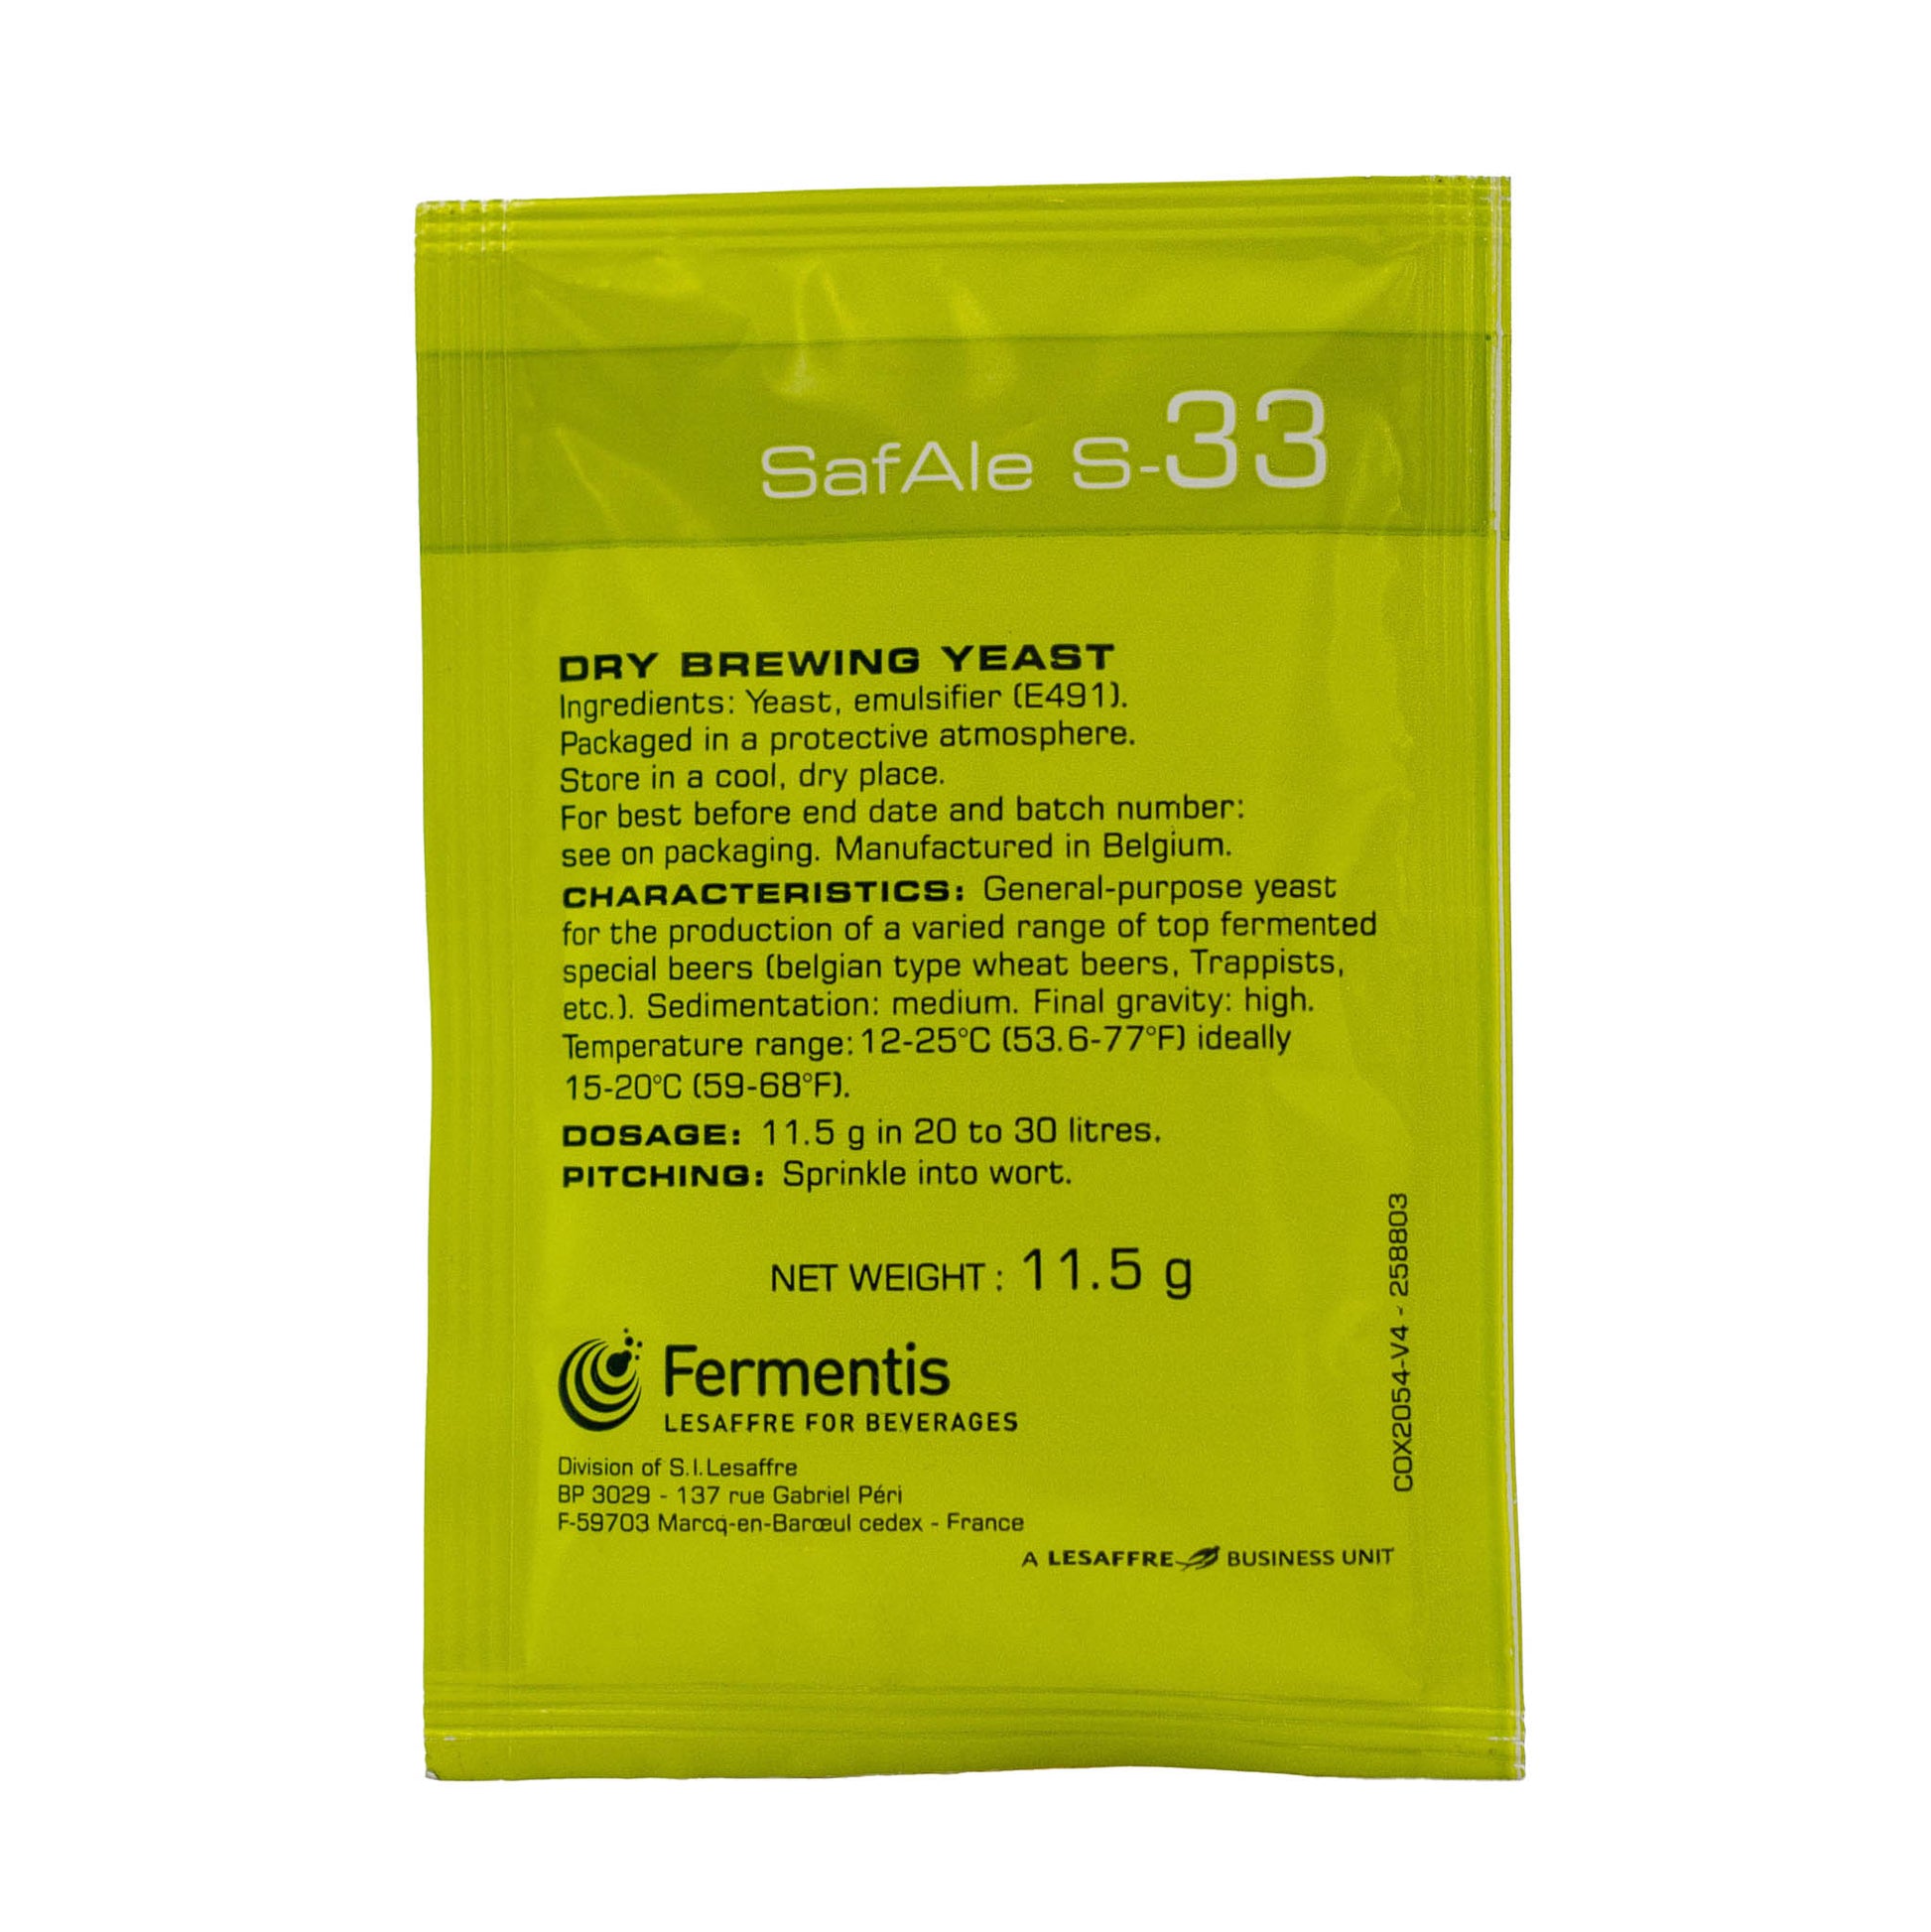 Safale s 33 dry brewing yeast. recommended for specialty ales and Trappist type beers.